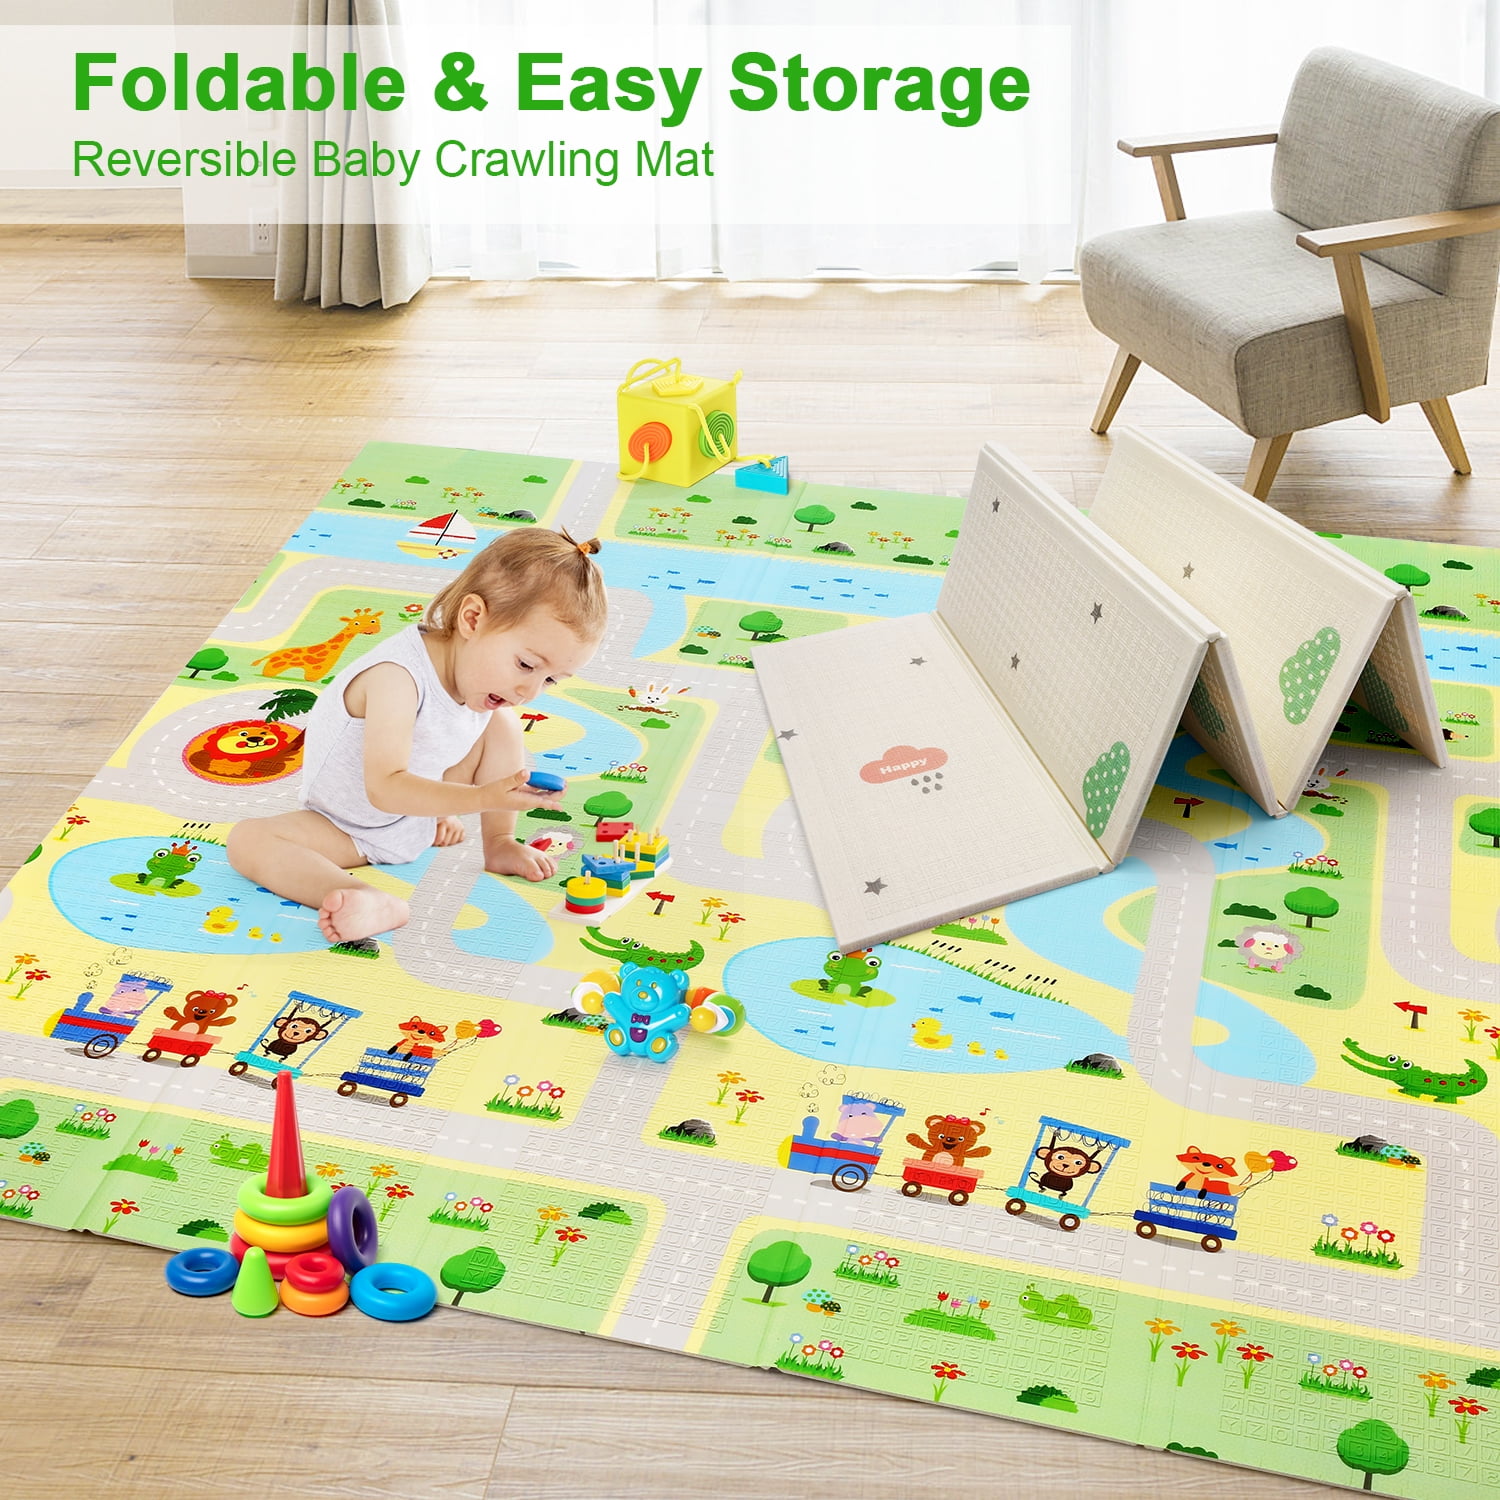 Play Mat for Kids with Graphics - Fits Large Table